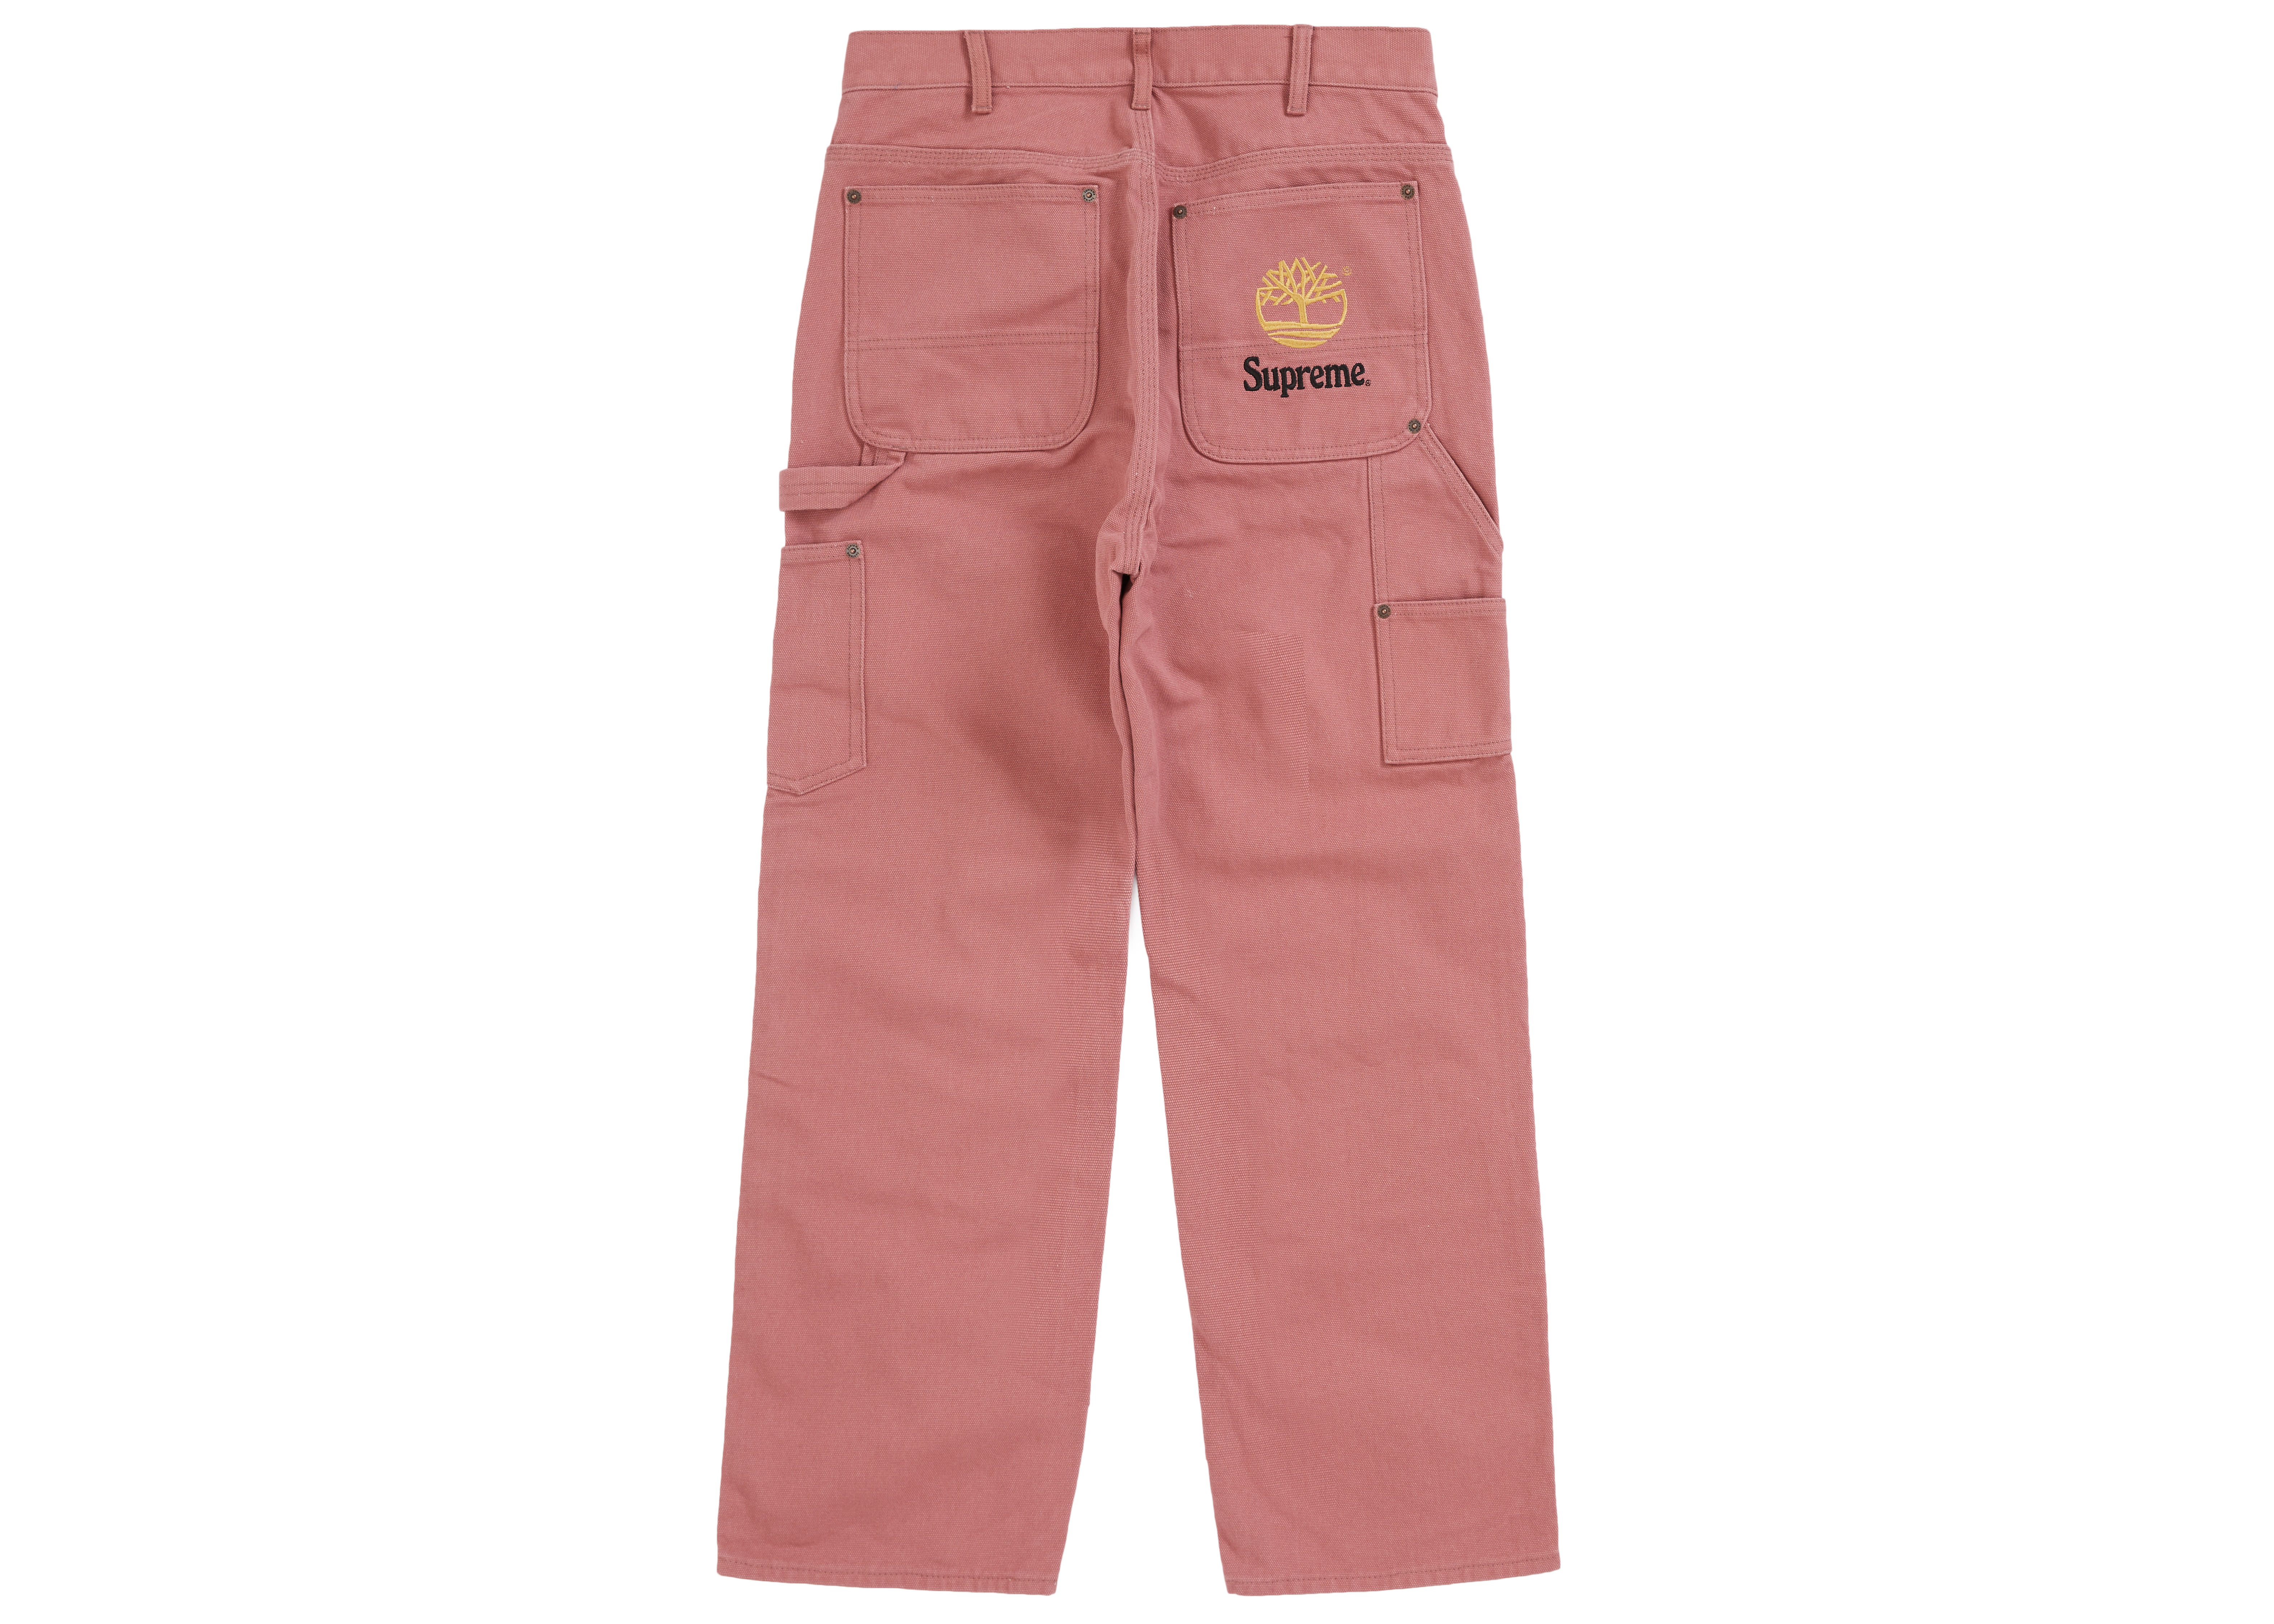 Supreme Timberland Double Knee Painter Pant Dusty Red Men's - SS21 